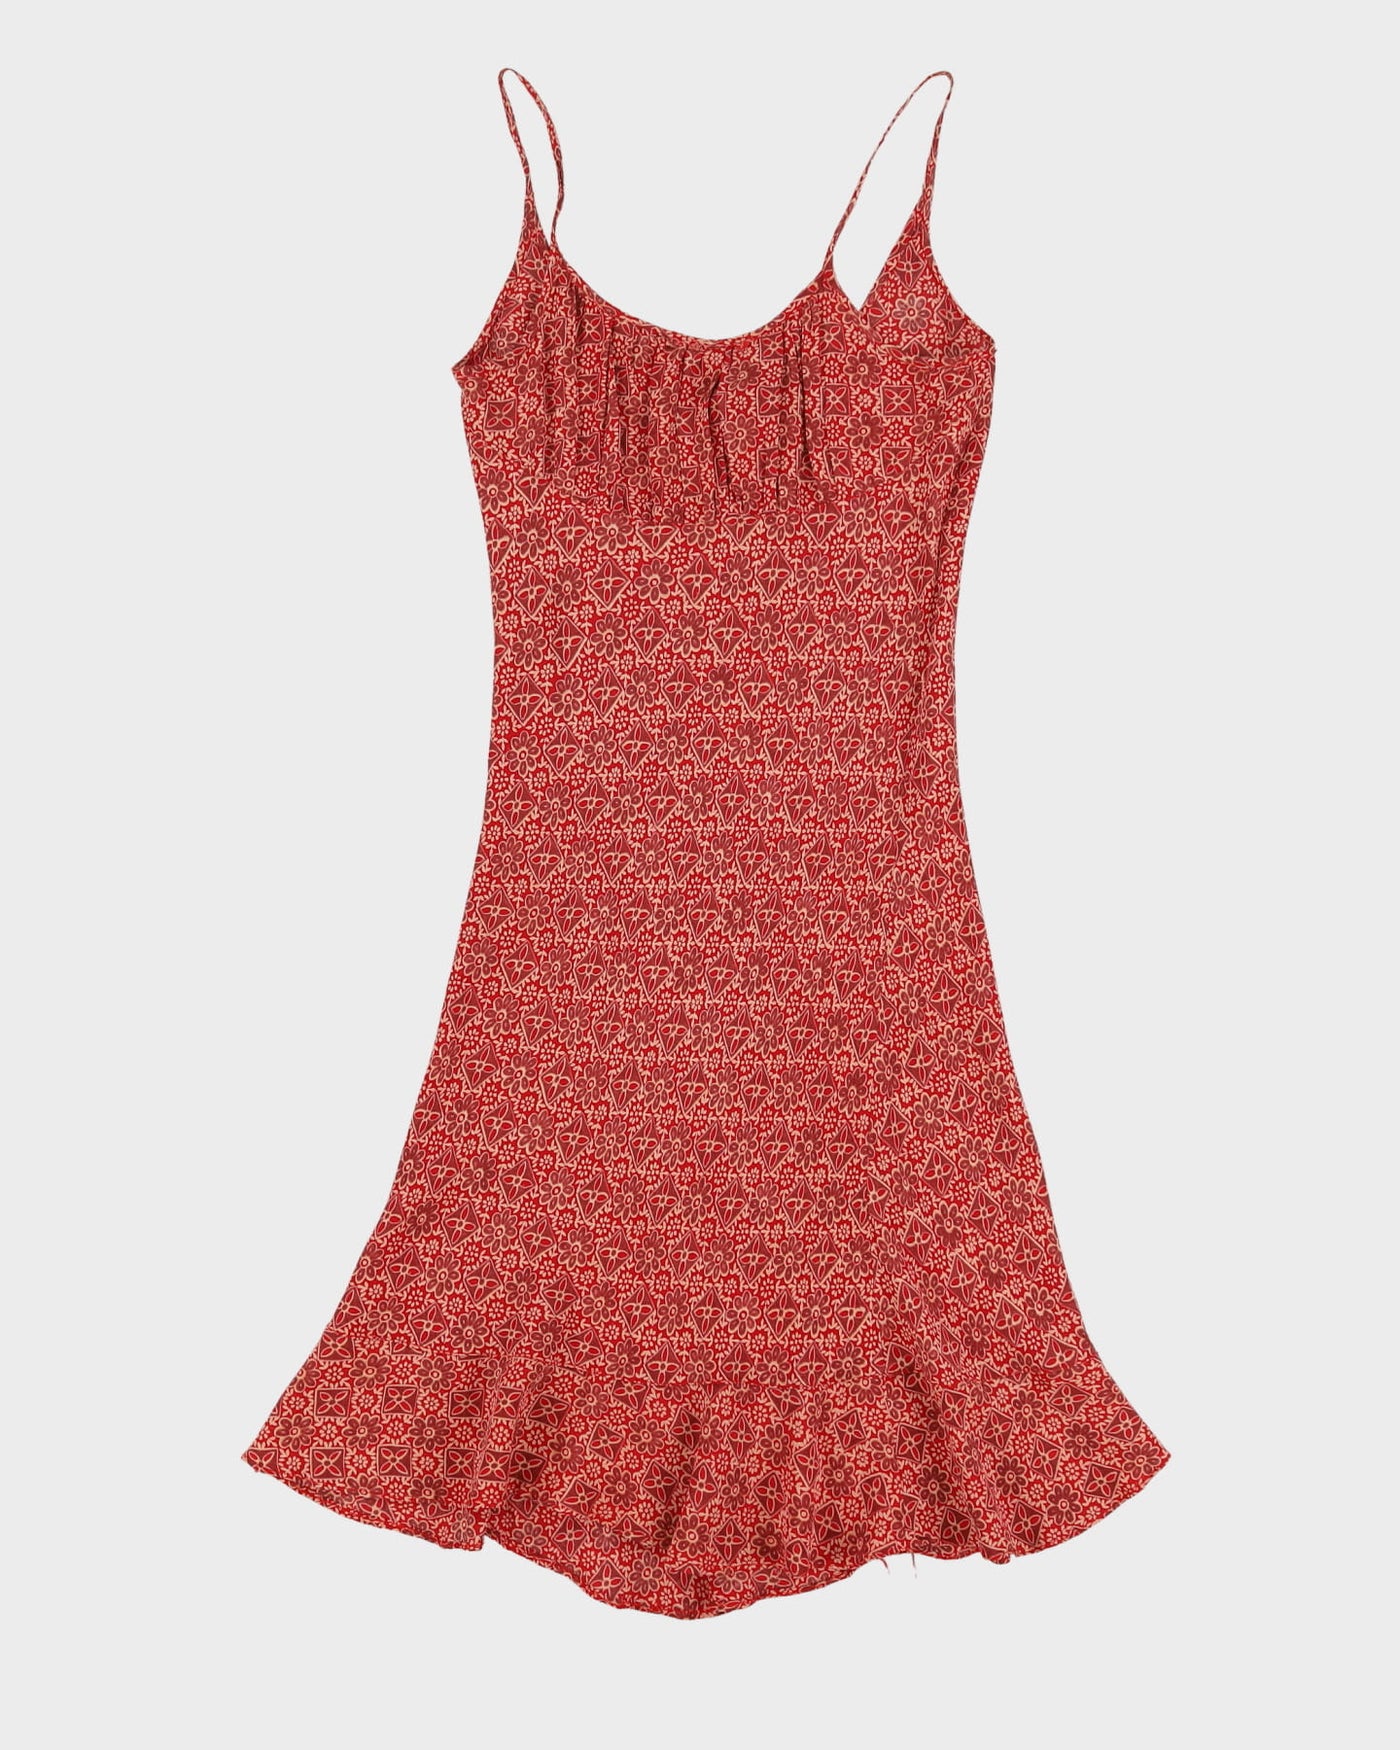 Red Patterned Sleeveless Dress - S